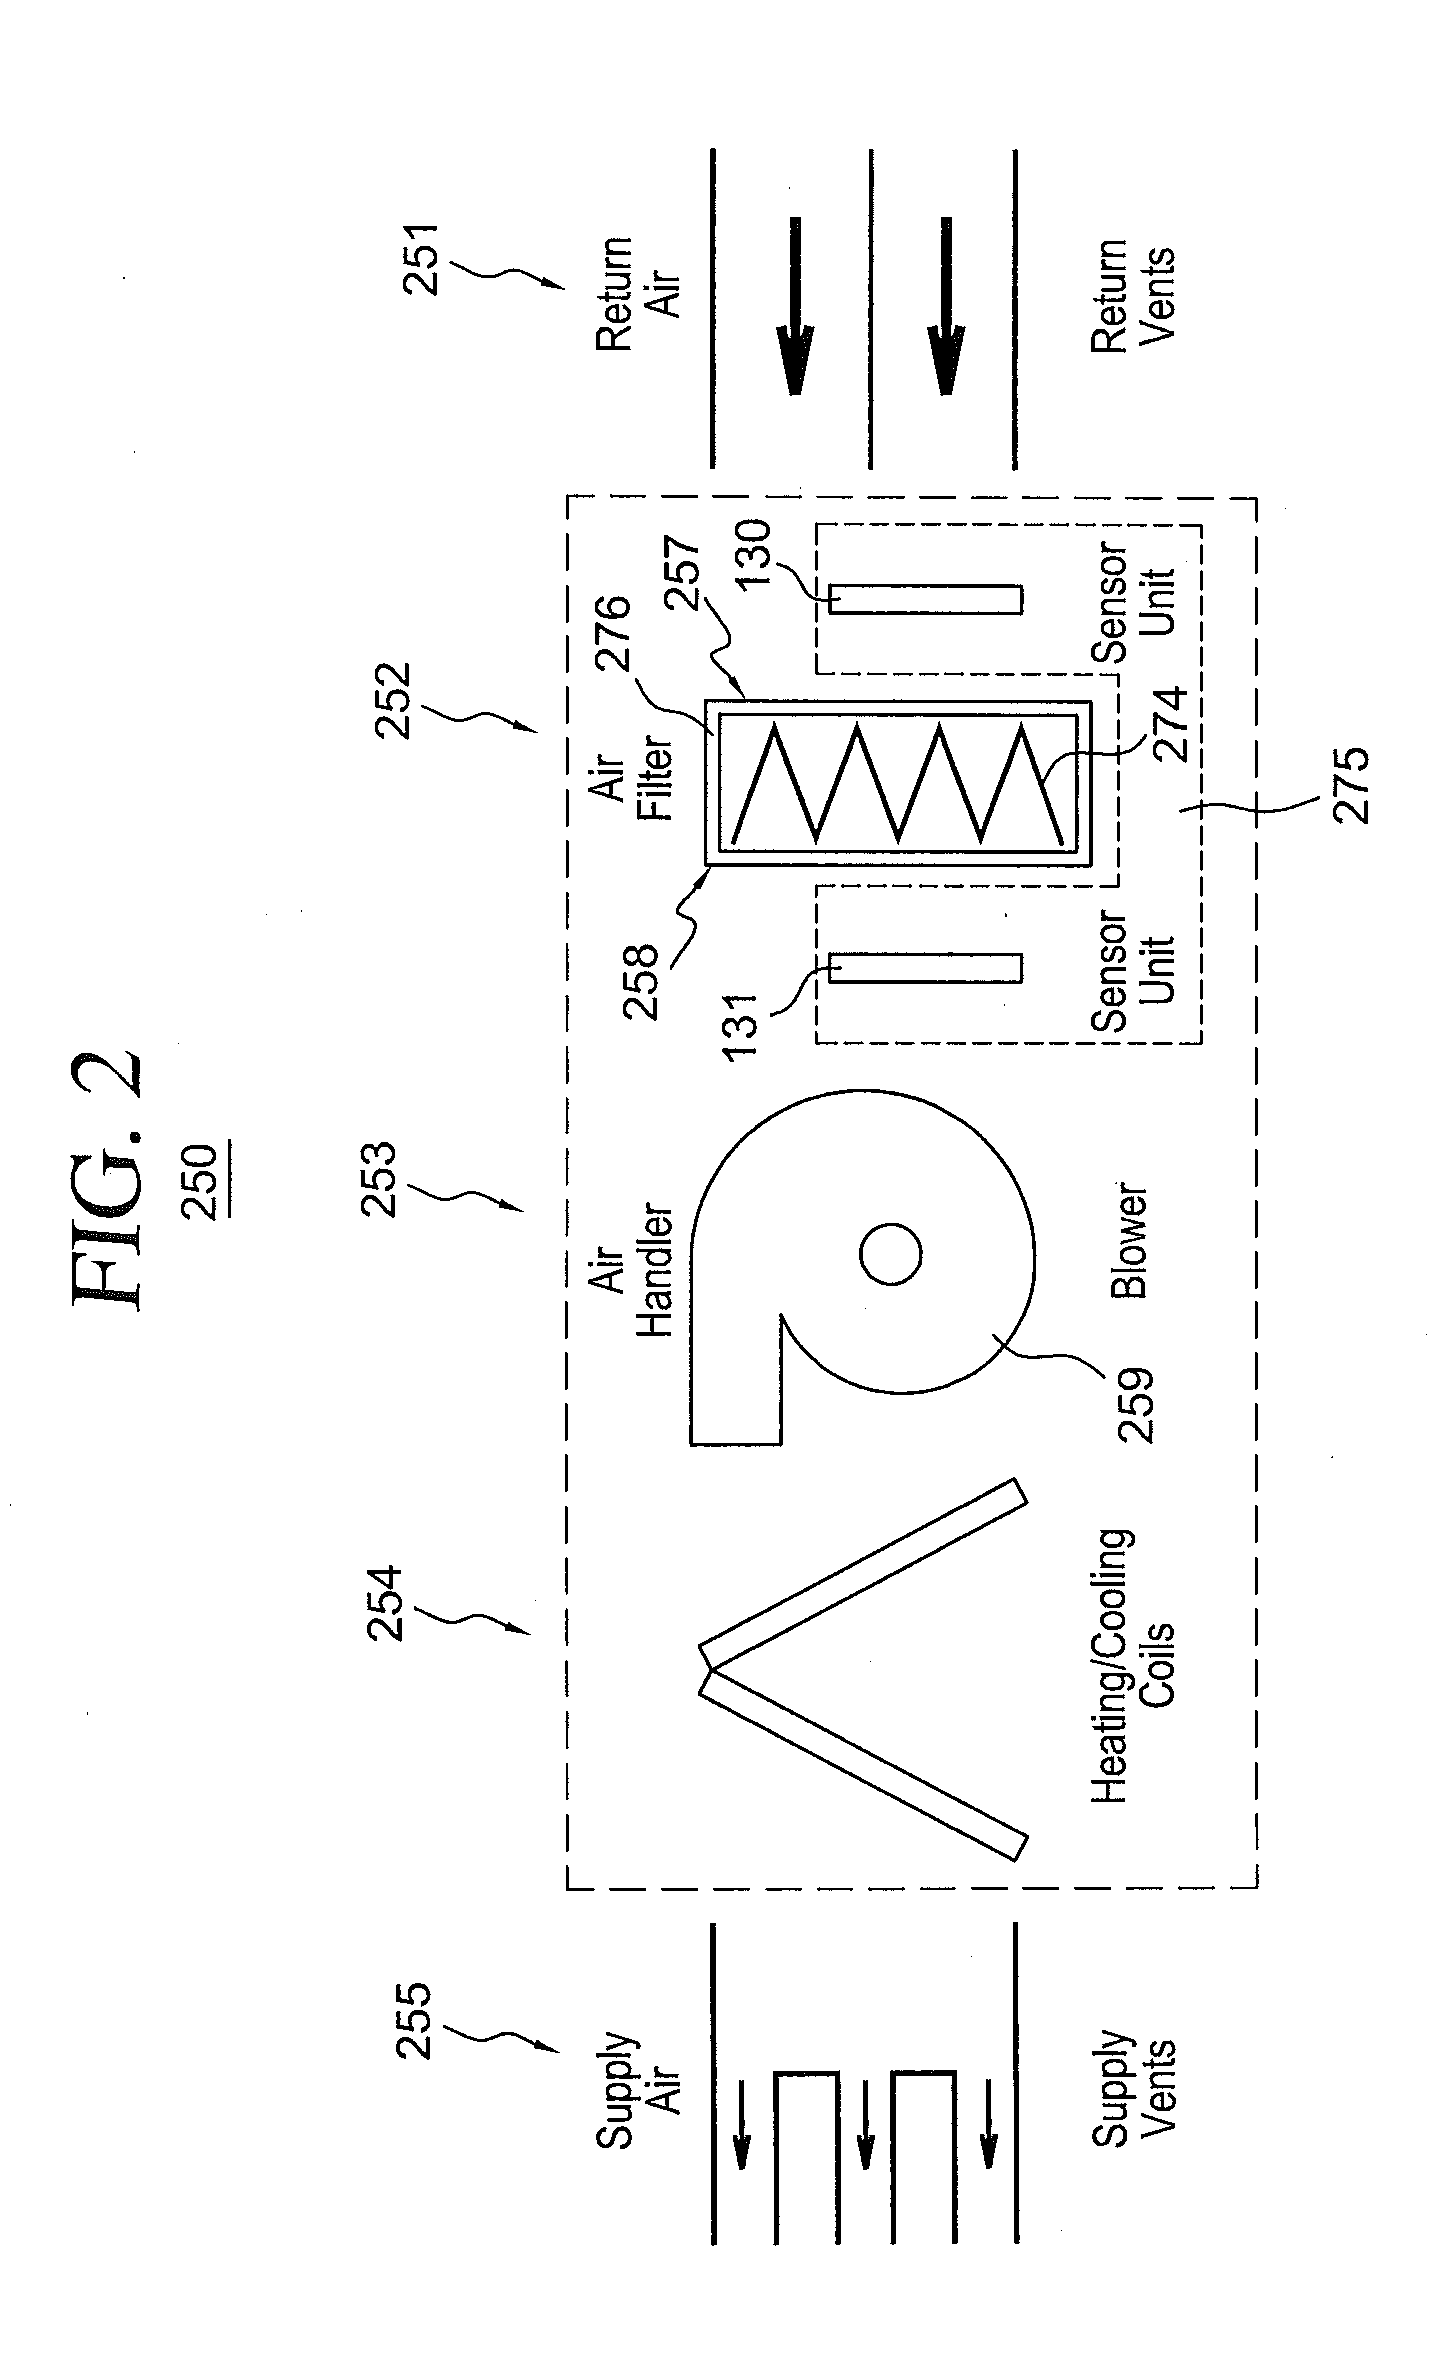 Motion Detecting Device, Method Of Providing The Same, And Method Of Detecting Movement